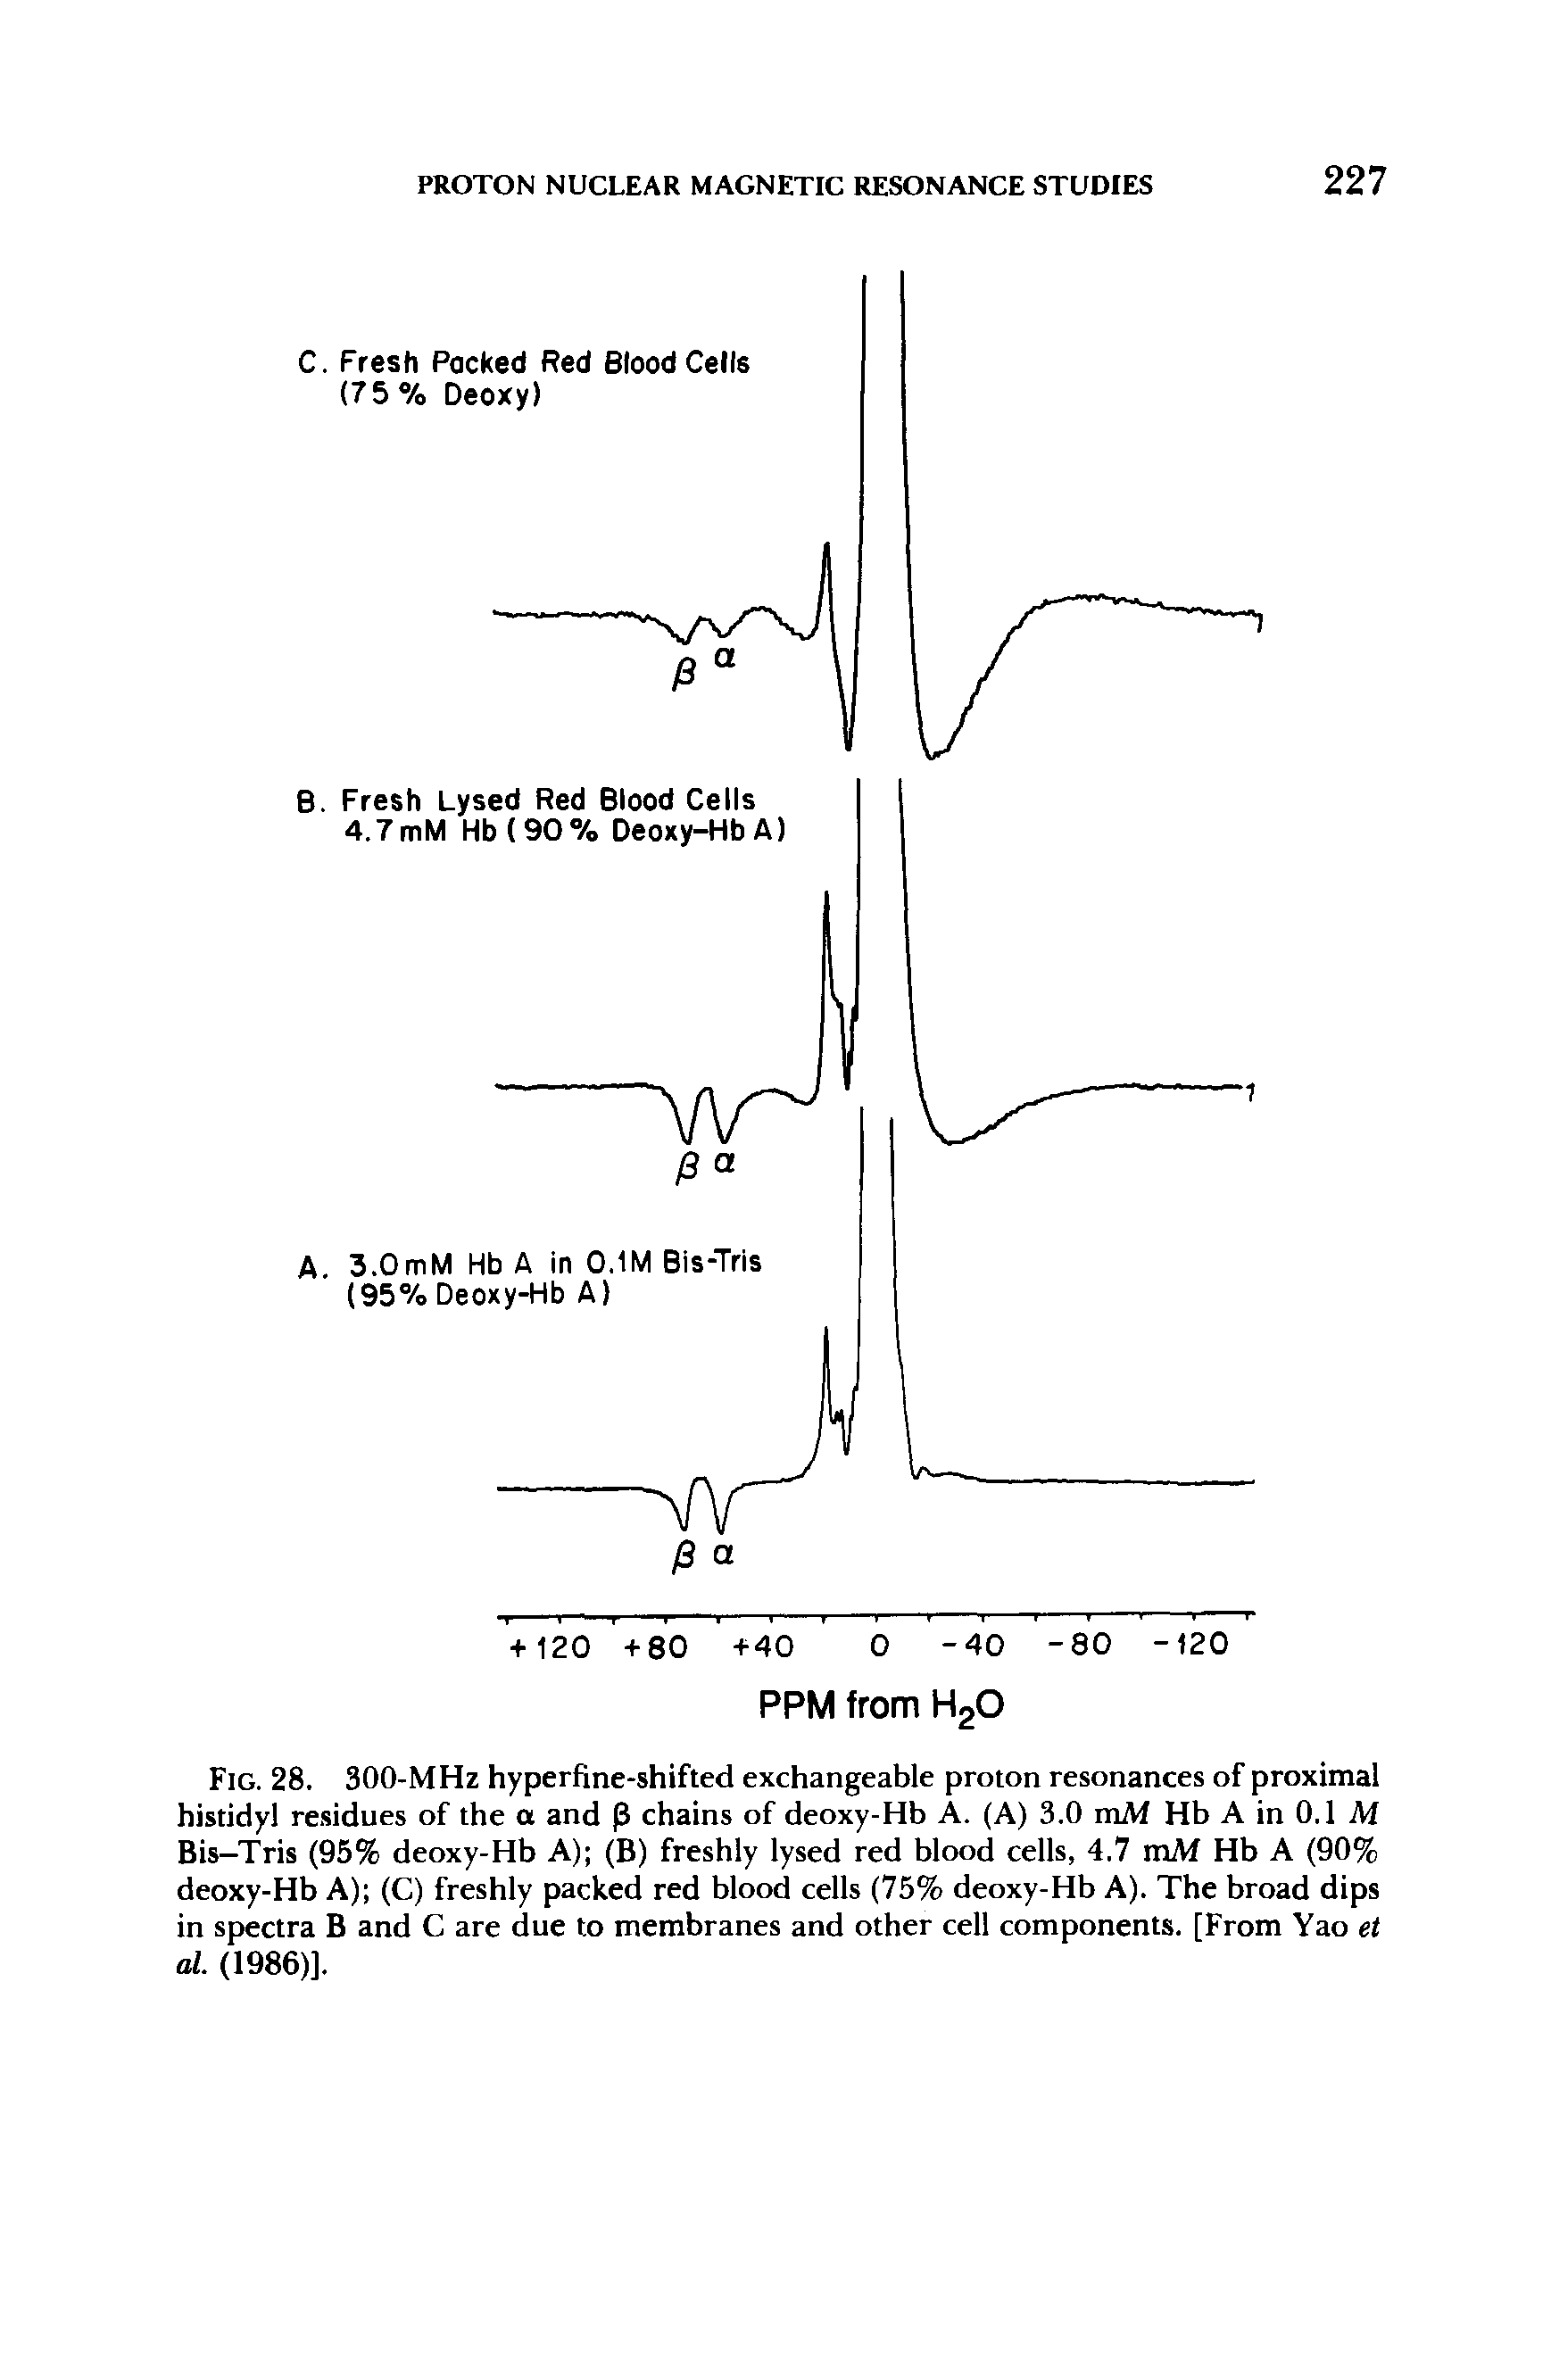 Fig. 28. 300-MHz hyperfine-shifted exchangeable proton resonances of proximal histidyl residues of the a and 0 chains of deoxy-Hb A. (A) 3.0 mM Hb A in 0.1 M Bis—Tris (95% deoxy-Hb A) (B) freshly lysed red blood cells, 4.7 mM Hb A (90% deoxy-Hb A) (C) freshly packed red blood cells (75% deoxy-Hb A). The broad dips in spectra B and C are due to membranes and other cell components. [From Yao et al. (1986)].